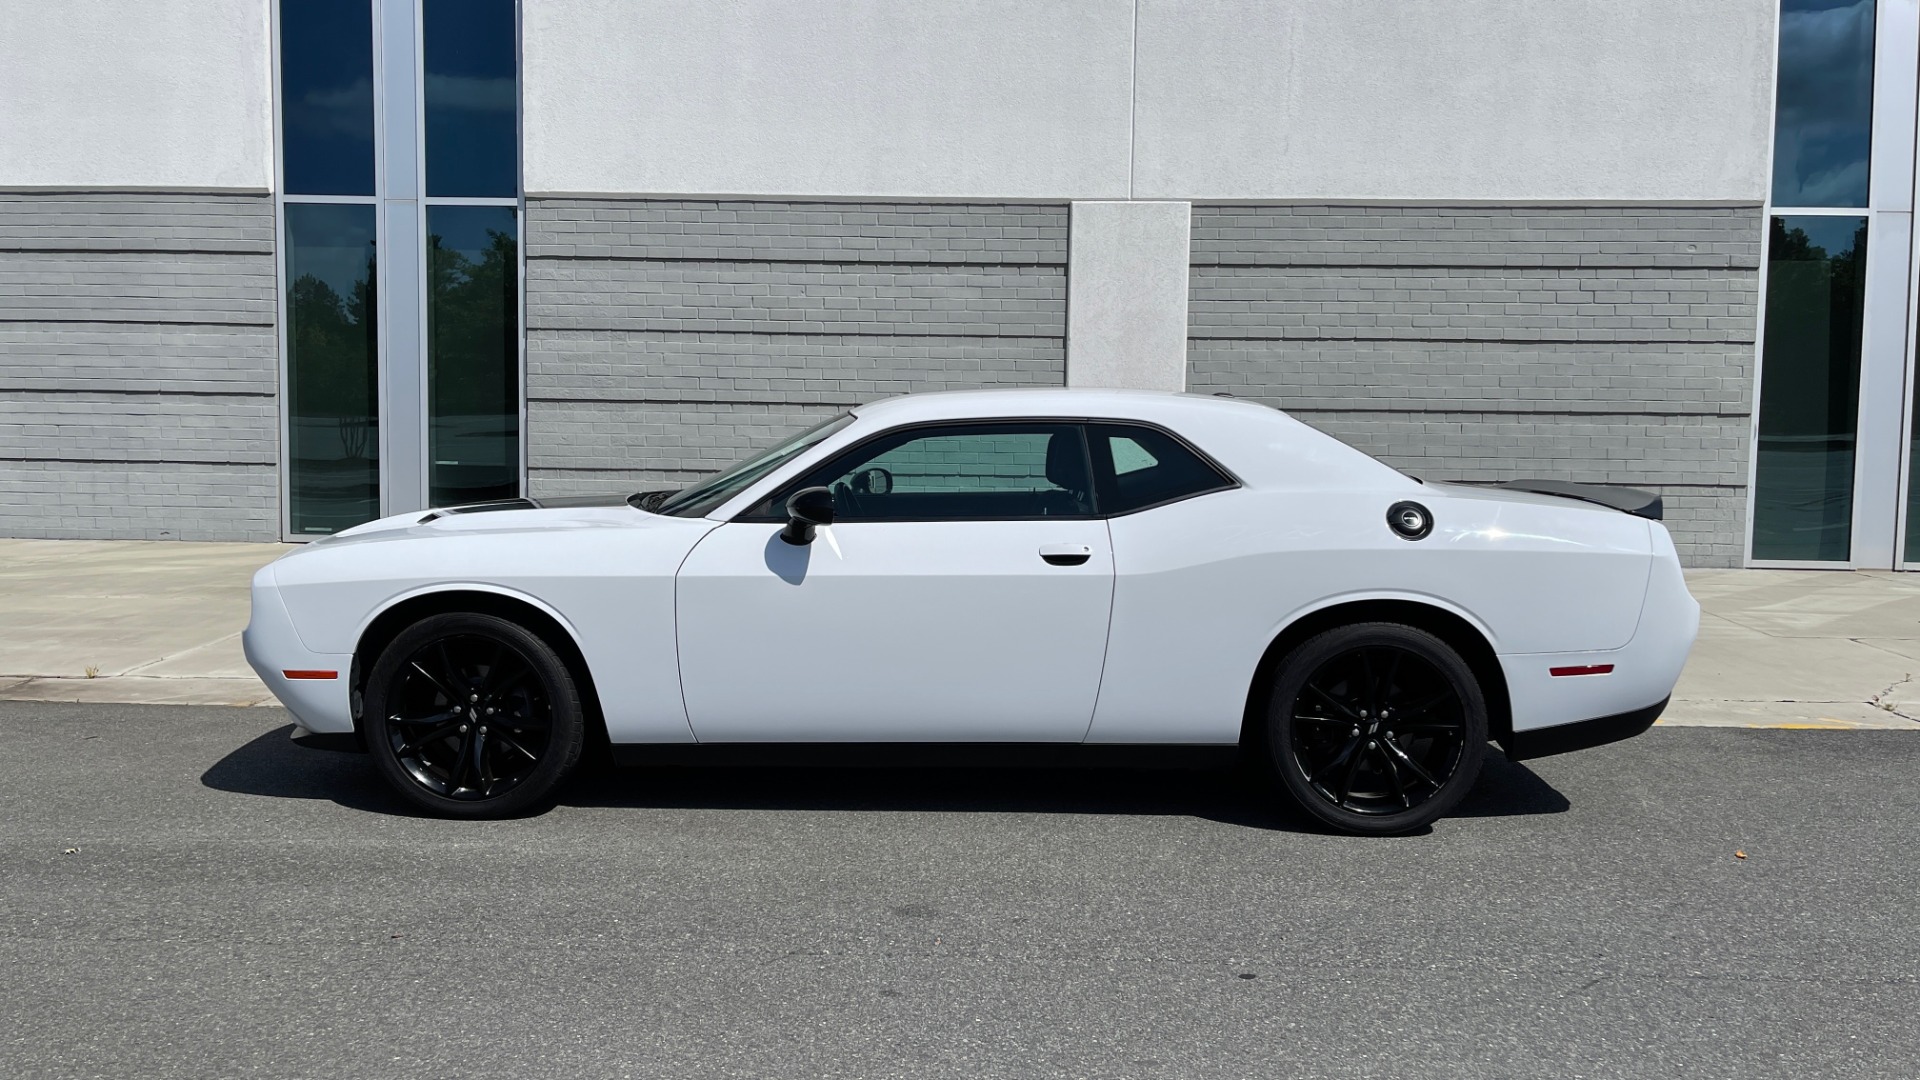 Used 2018 Dodge CHALLENGER SXT COUPE / BLACKTOP PKG / 3.6L V6 / 8-SPD AUTO / REARVIEW for sale Sold at Formula Imports in Charlotte NC 28227 4